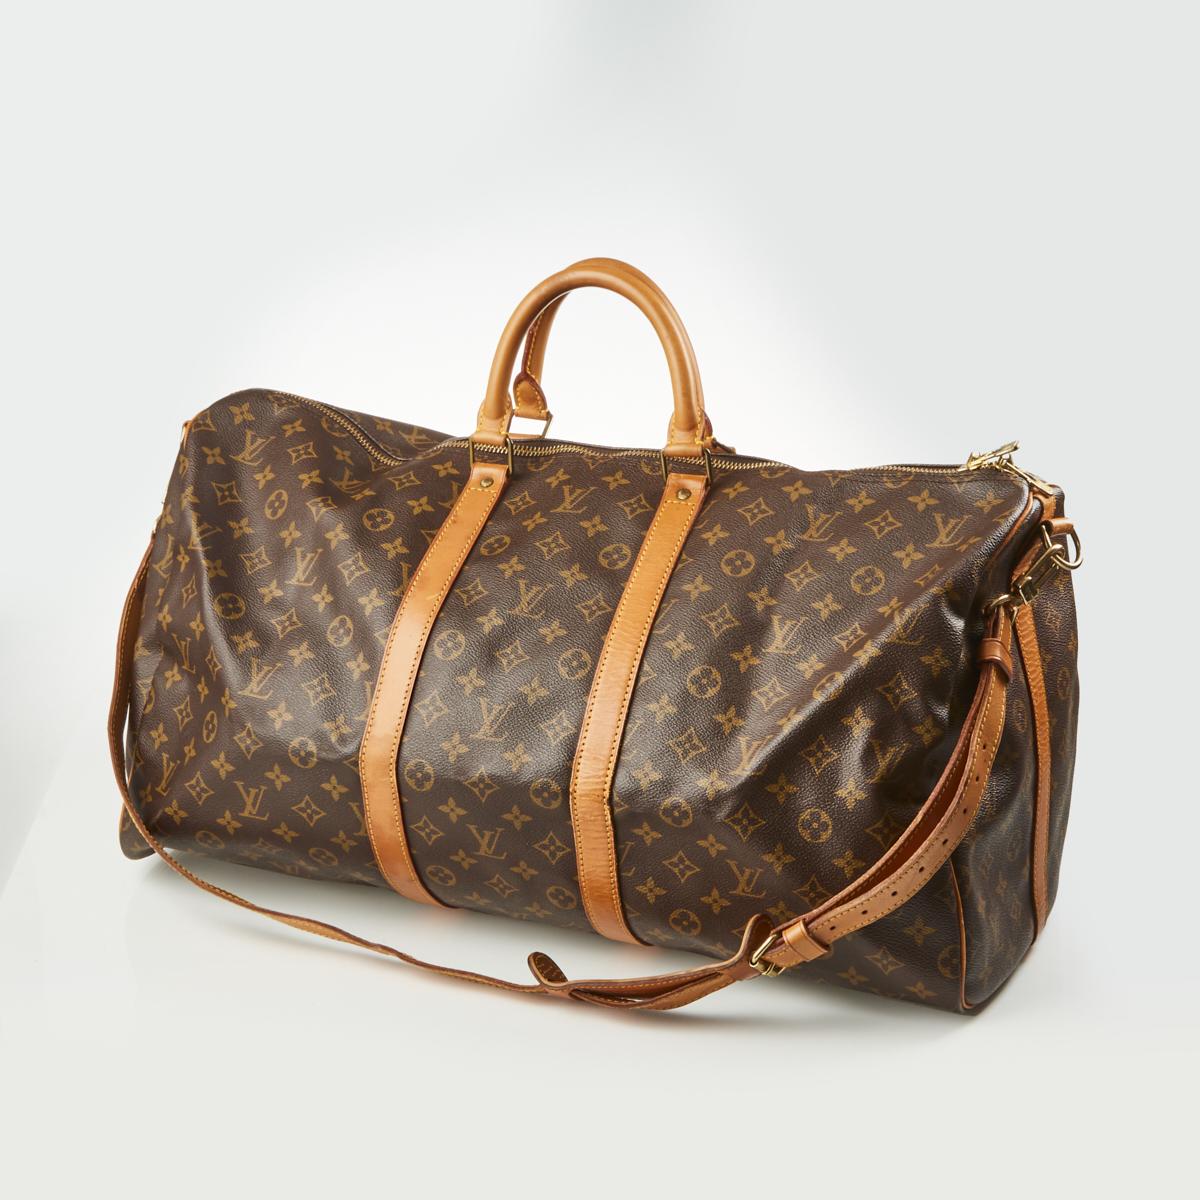 Sold at Auction: Louis Vuitton Keepall Bandouliere Bag Monogram